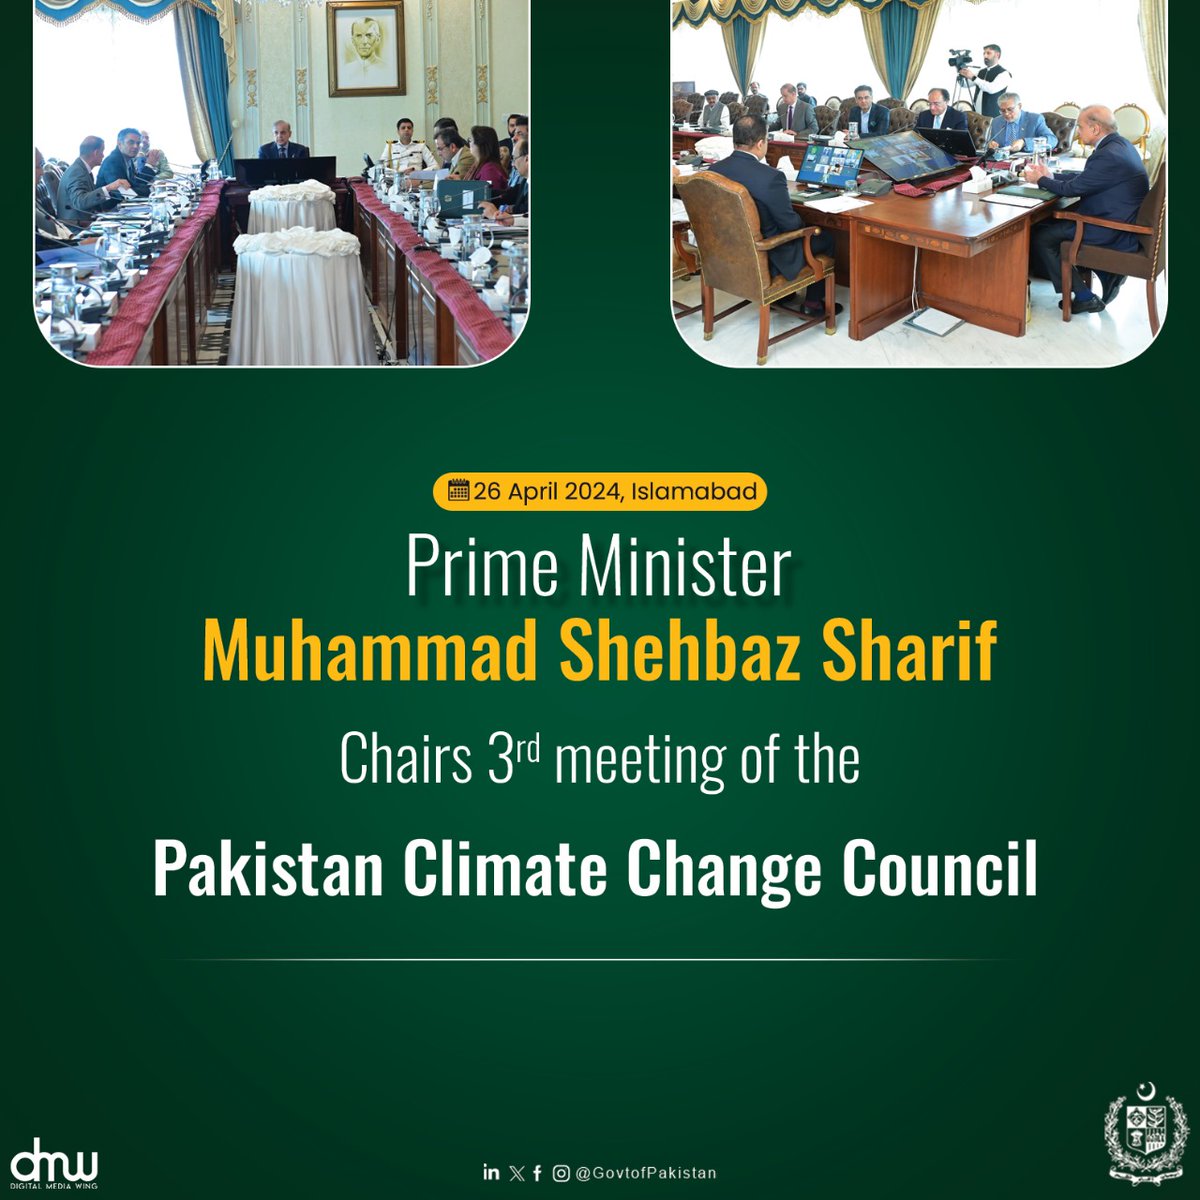 Prime Minister Muhammad Shehbaz Sharif chairs 3rd meeting of the Pakistan Climate Change Council, today in Islamabad.